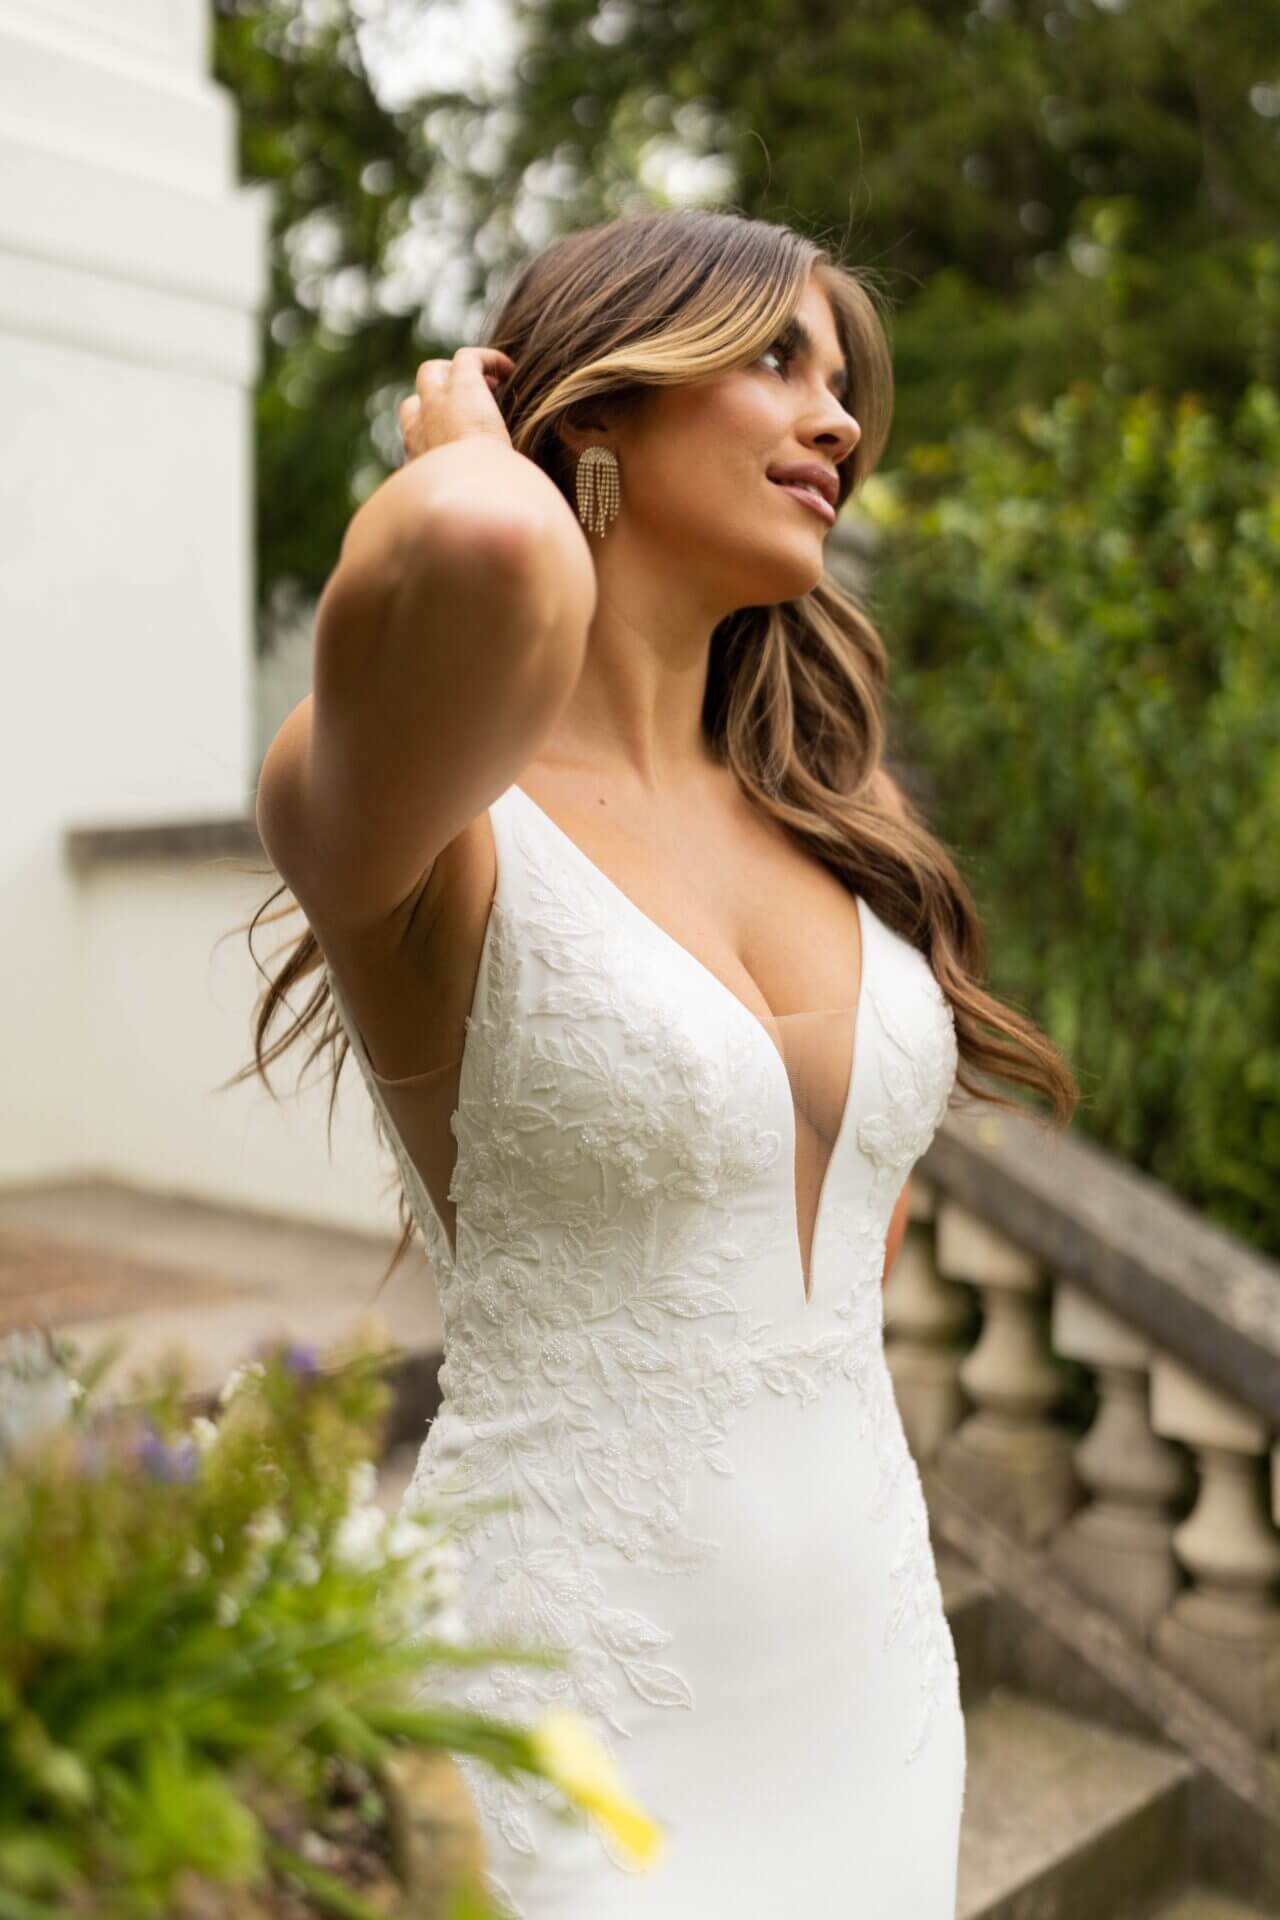 This designer fit-and-flare strapless wedding dress from Stella